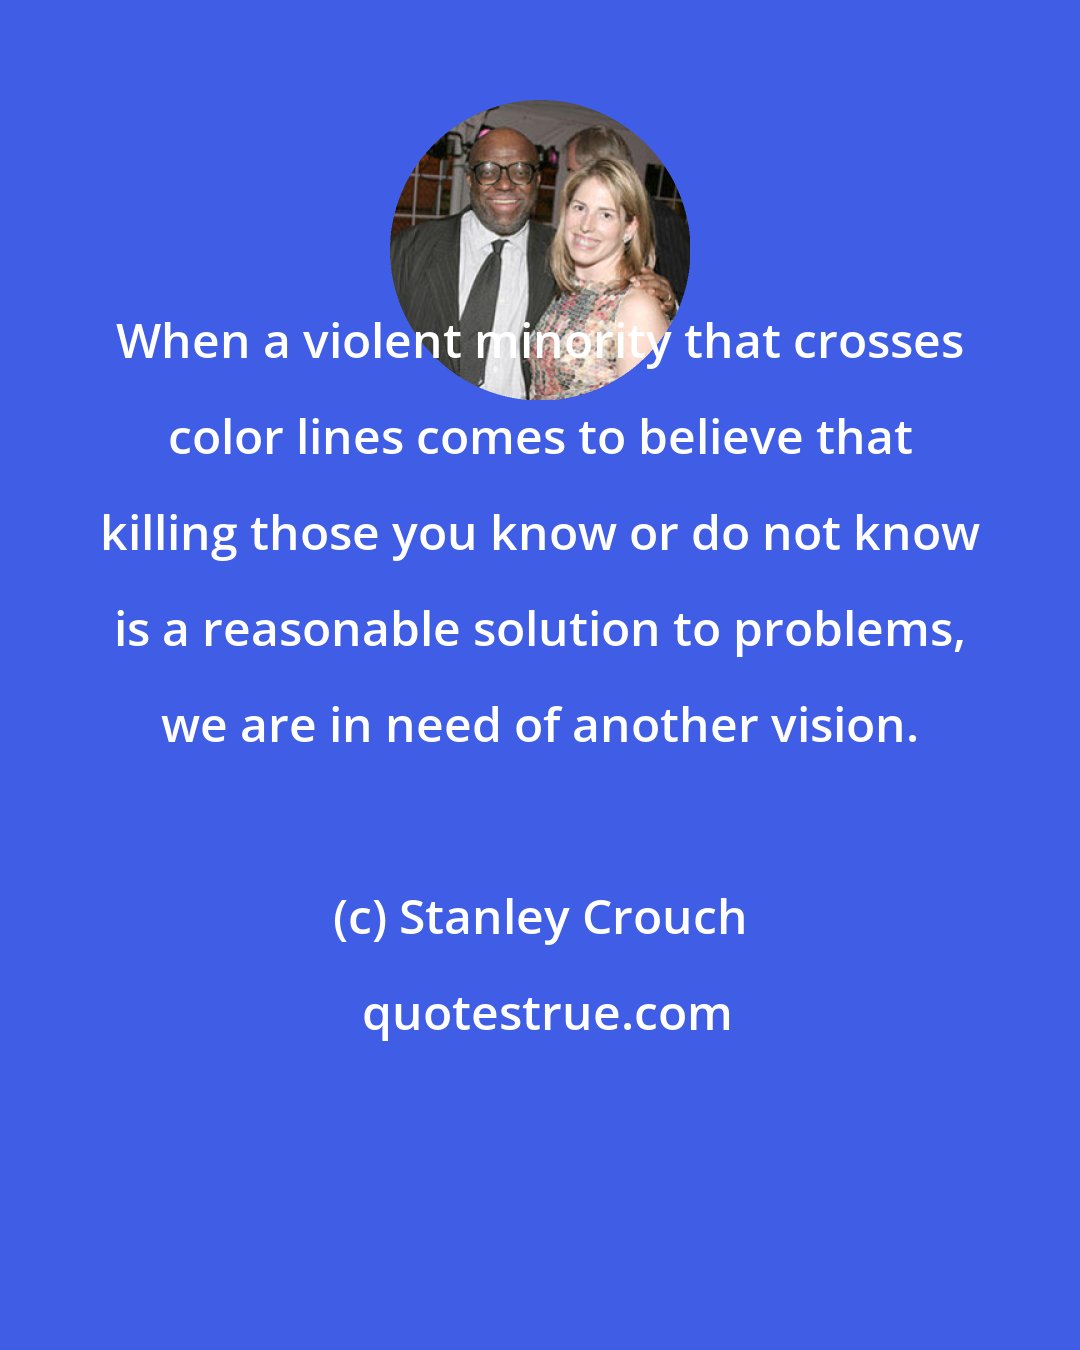 Stanley Crouch: When a violent minority that crosses color lines comes to believe that killing those you know or do not know is a reasonable solution to problems, we are in need of another vision.